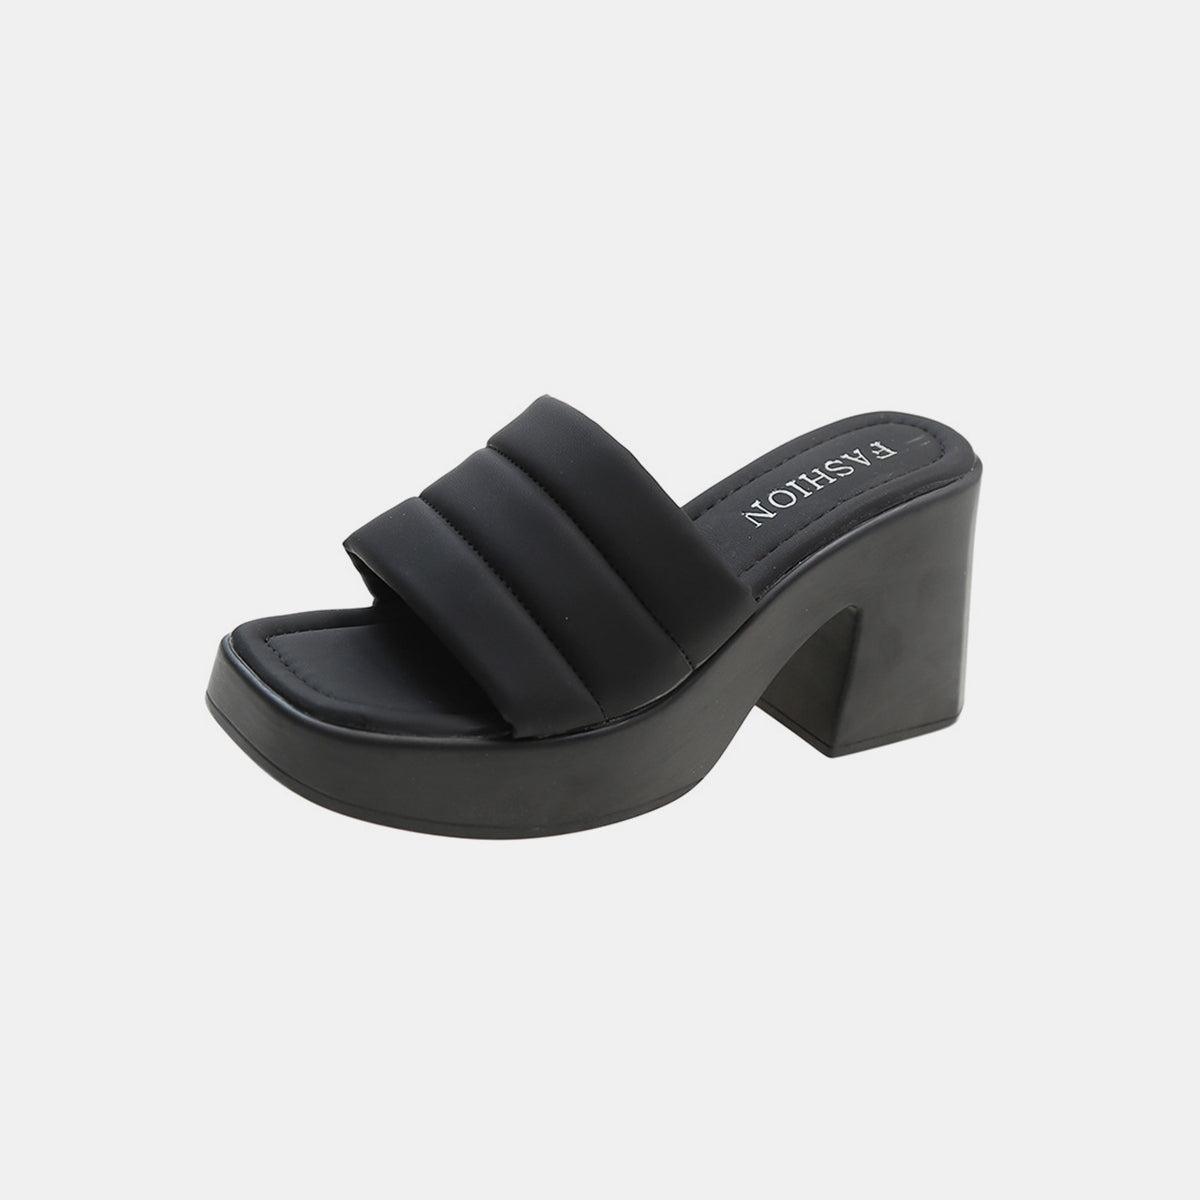 a woman's black platformed sandal with an open toe